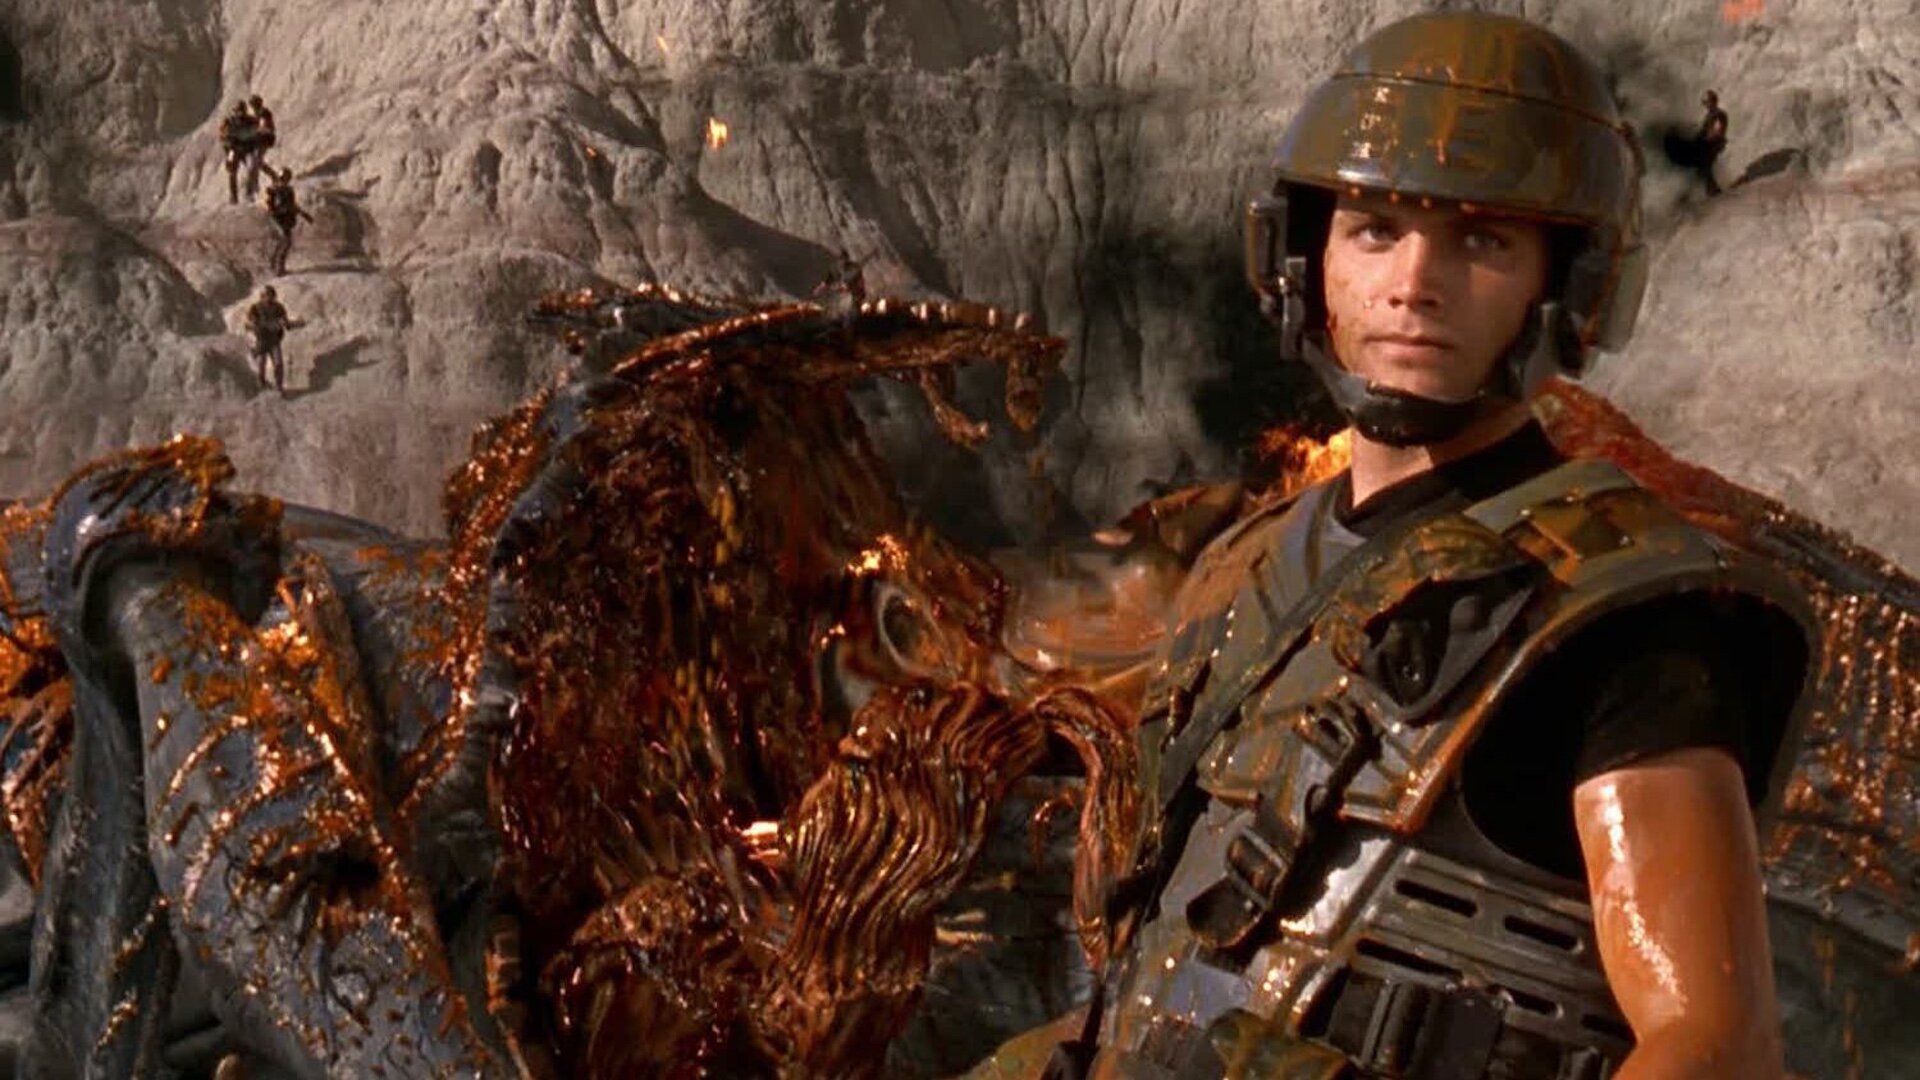 The Cult Classic Sci Fi Film STARSHIP TROOPERS Gets An Honest